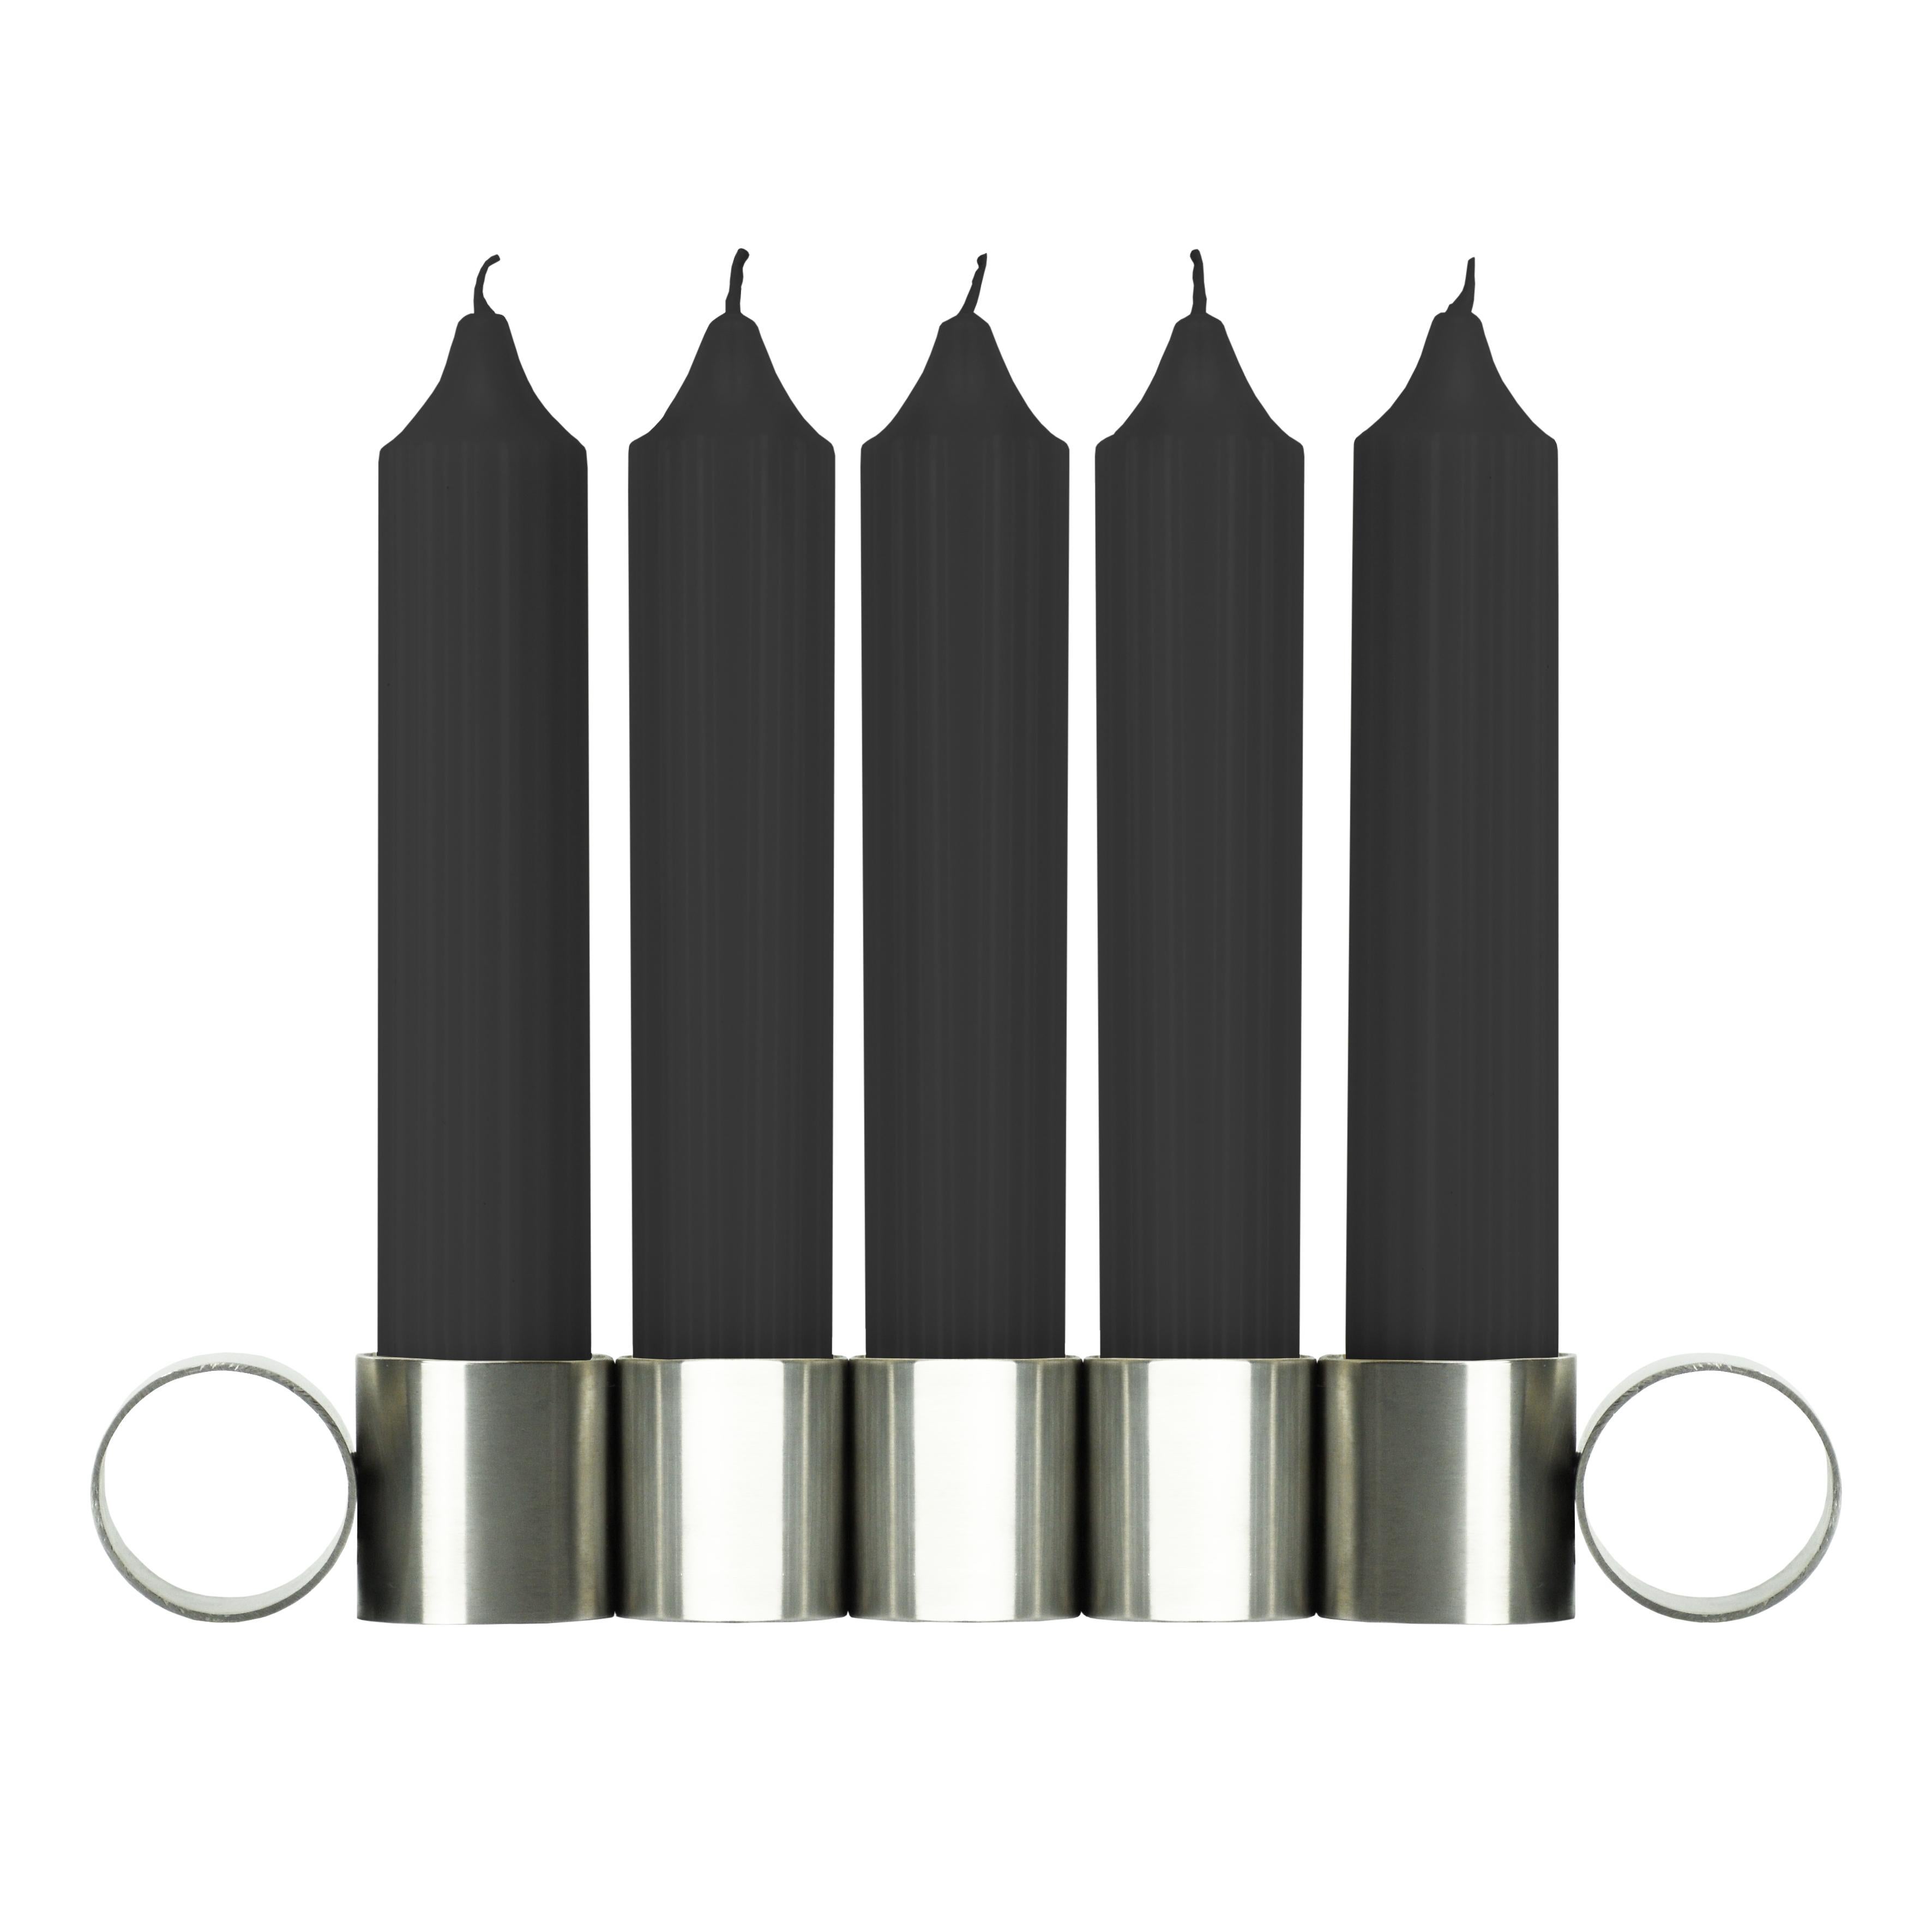 Stainless Steel Tempio del Tempo 5 Candleholder by Coki Barbieri For Sale